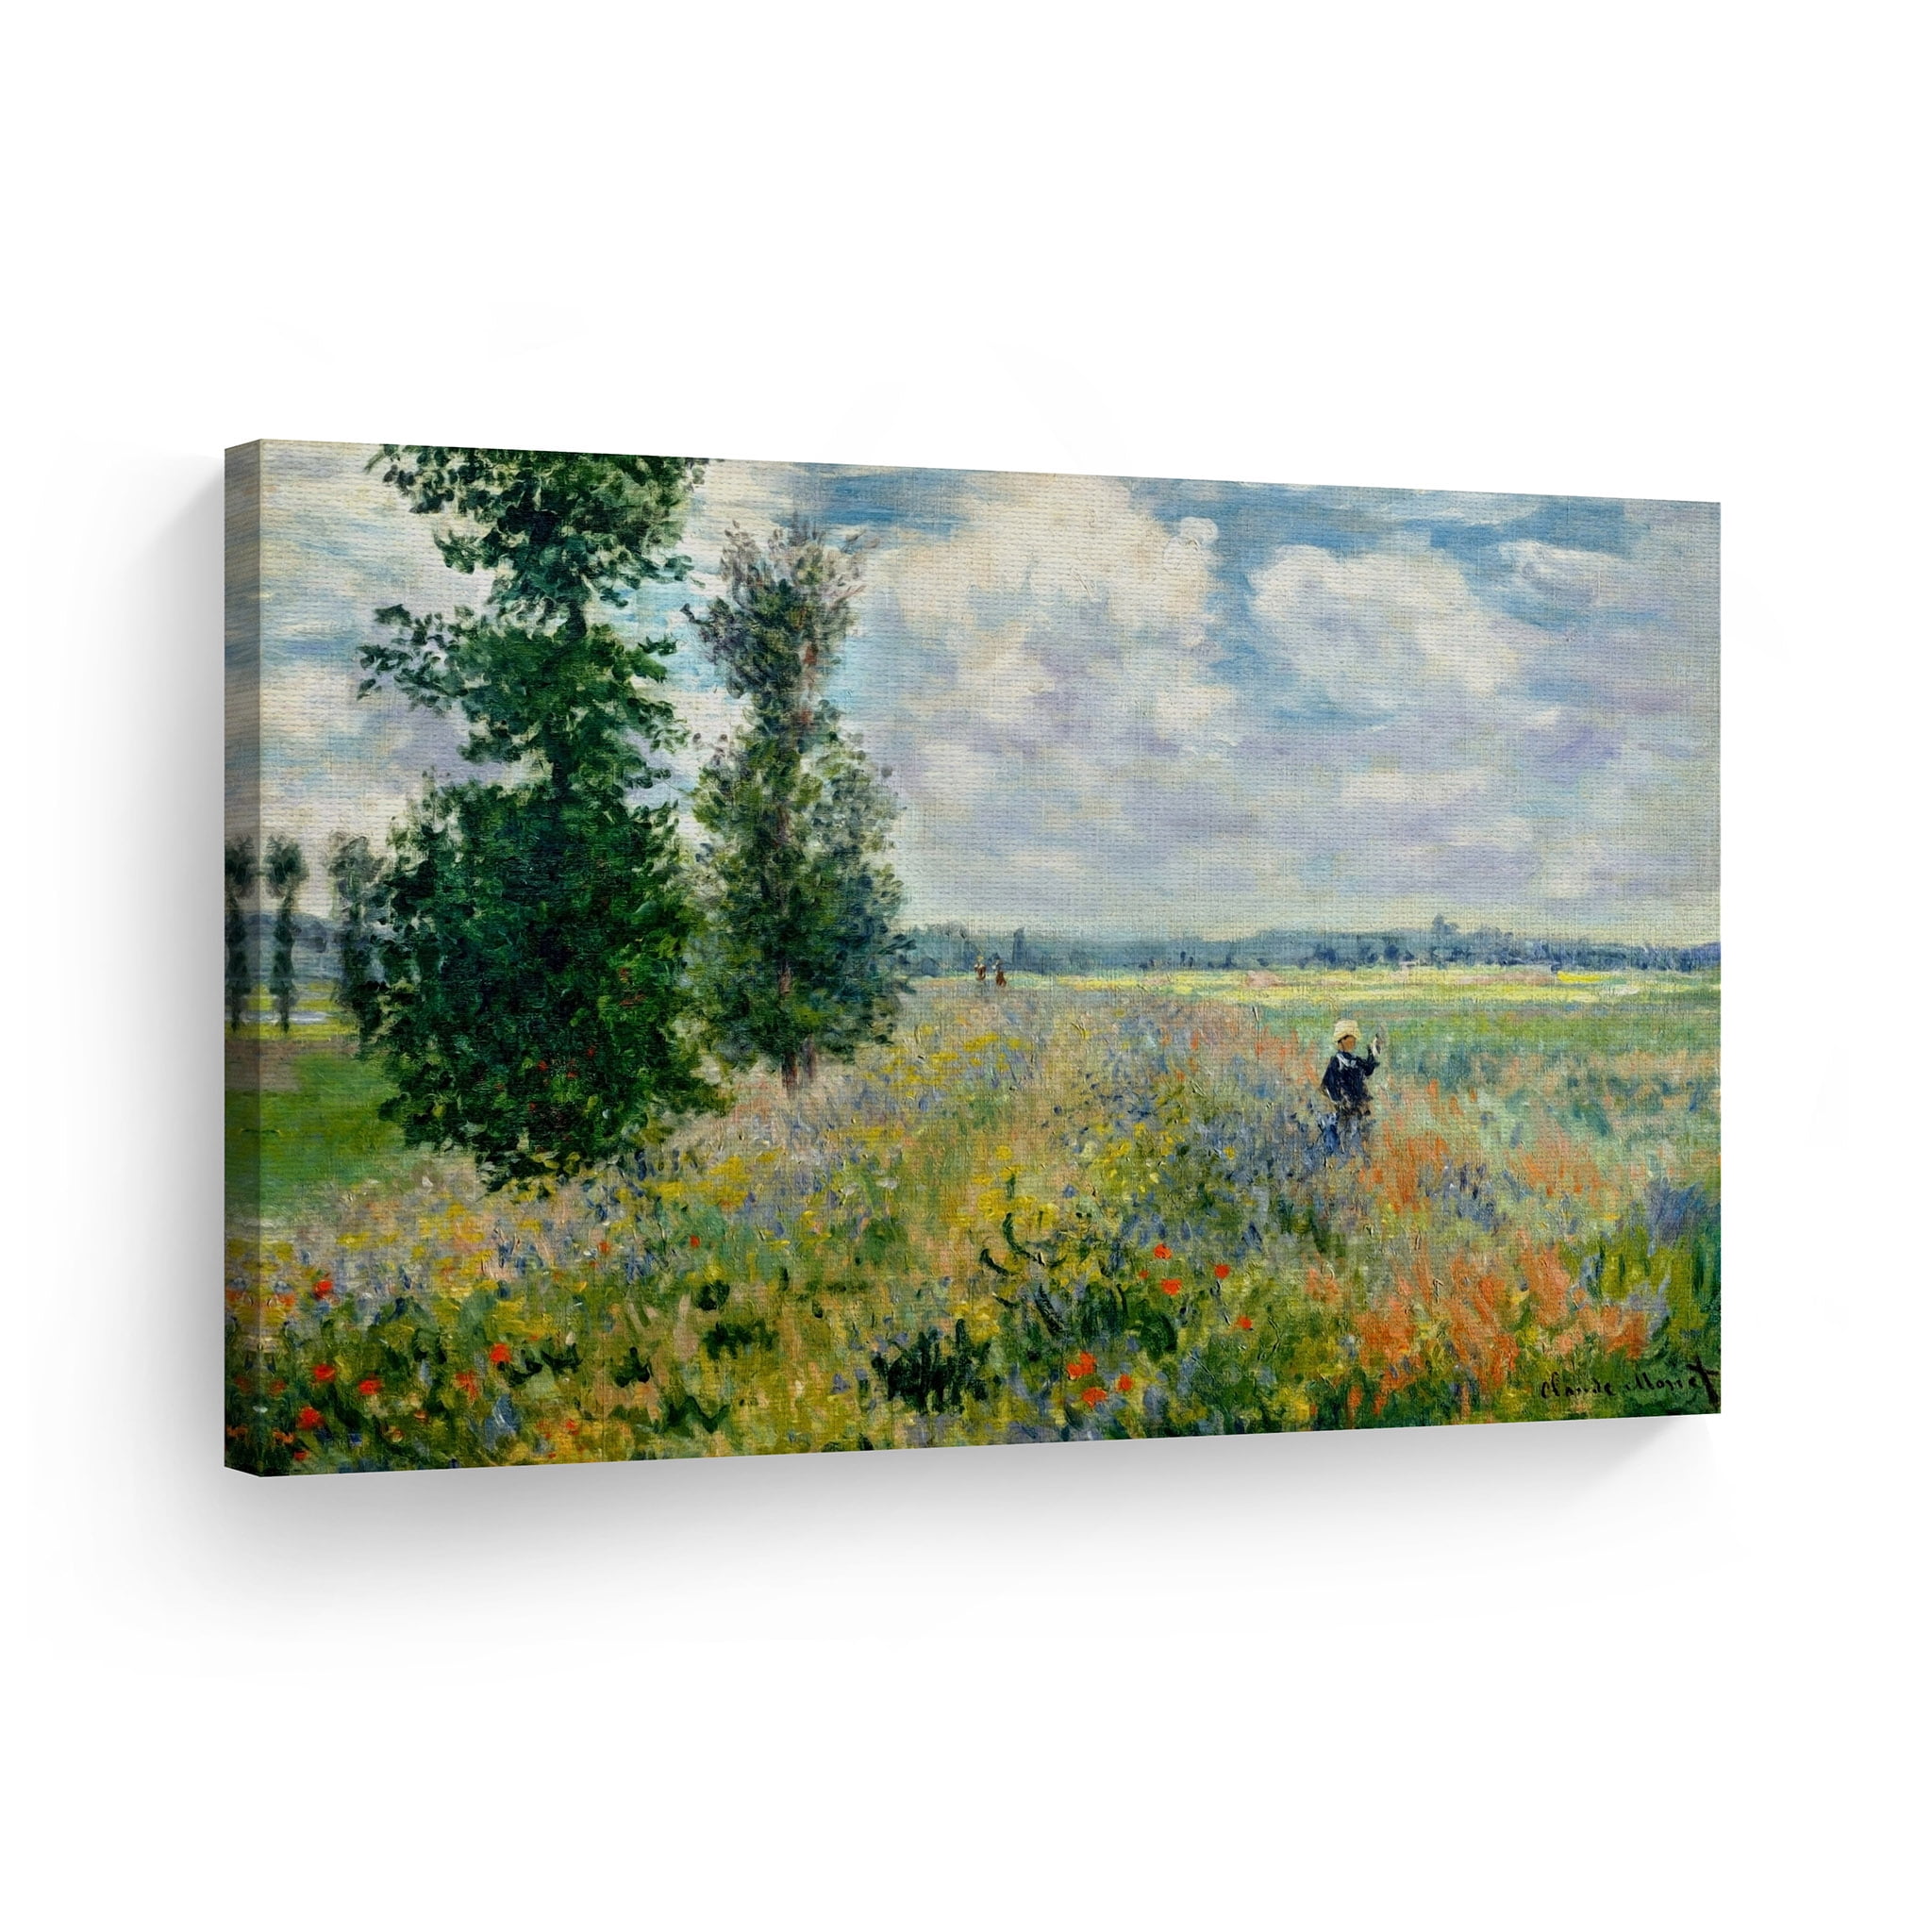 RED FLOWERS FIELD POPPY SCENE CANVAS Wall Art Picture Print A4 